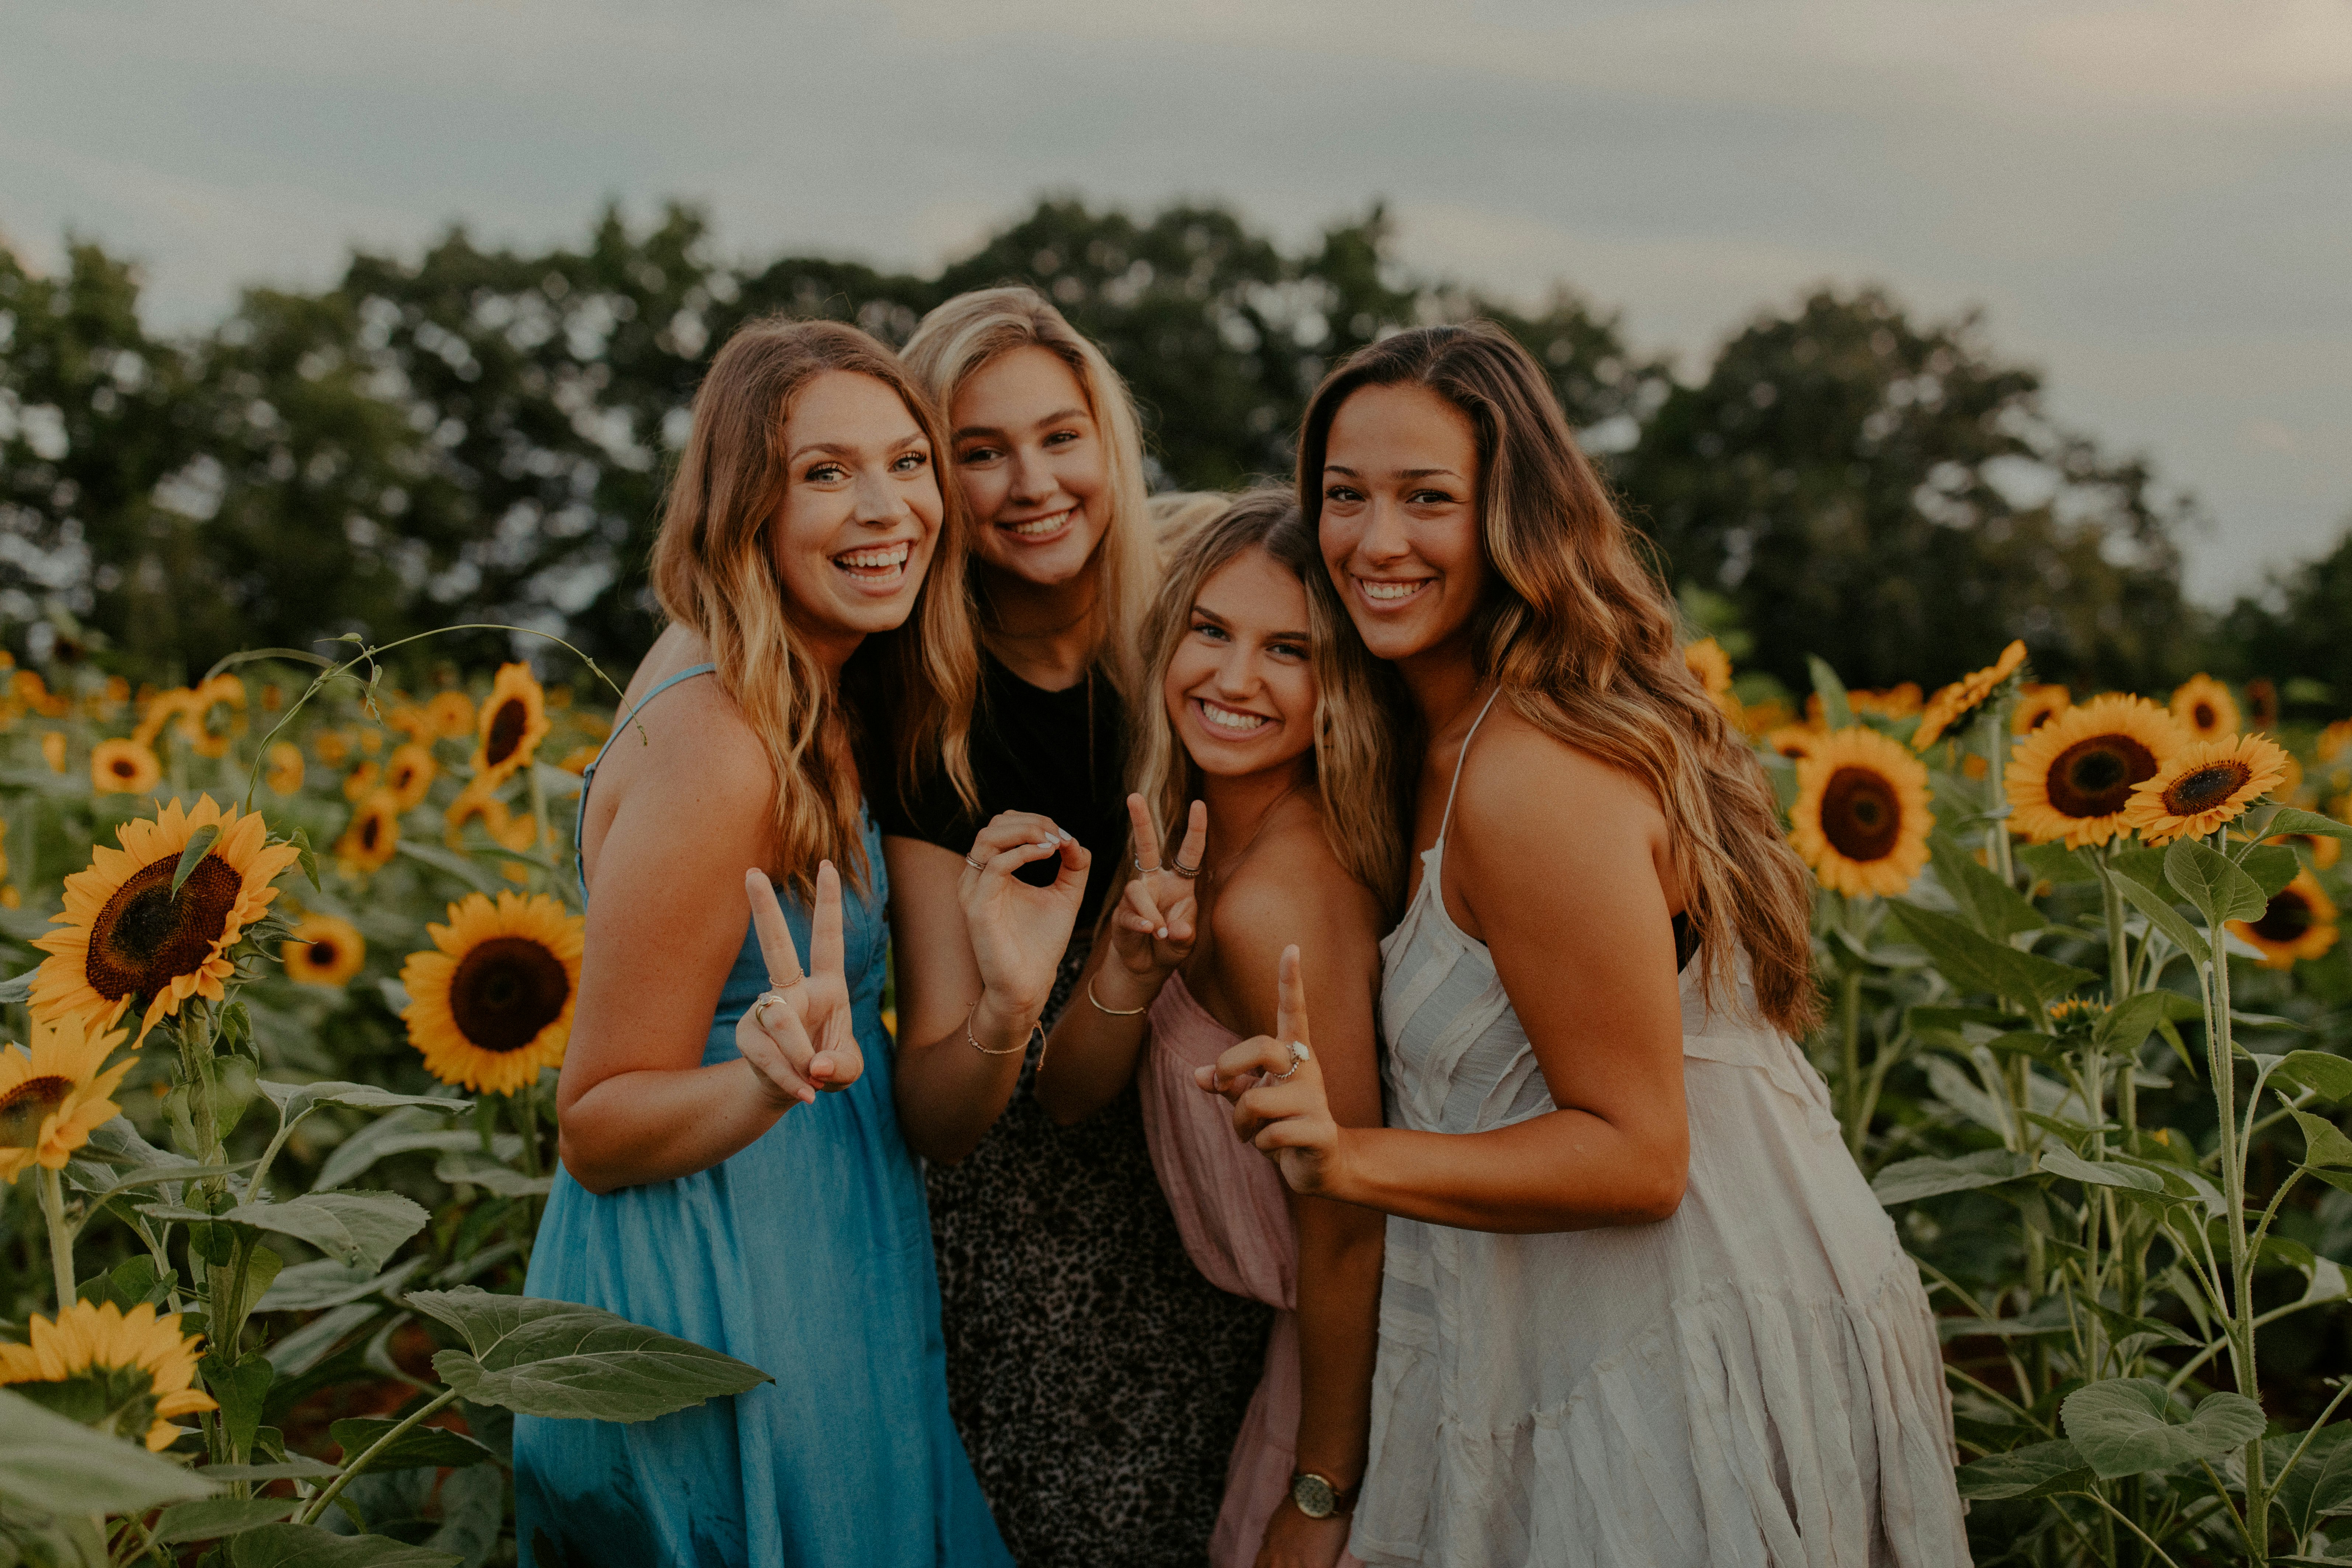 3 women smiling and standing on sunflower field during daytime